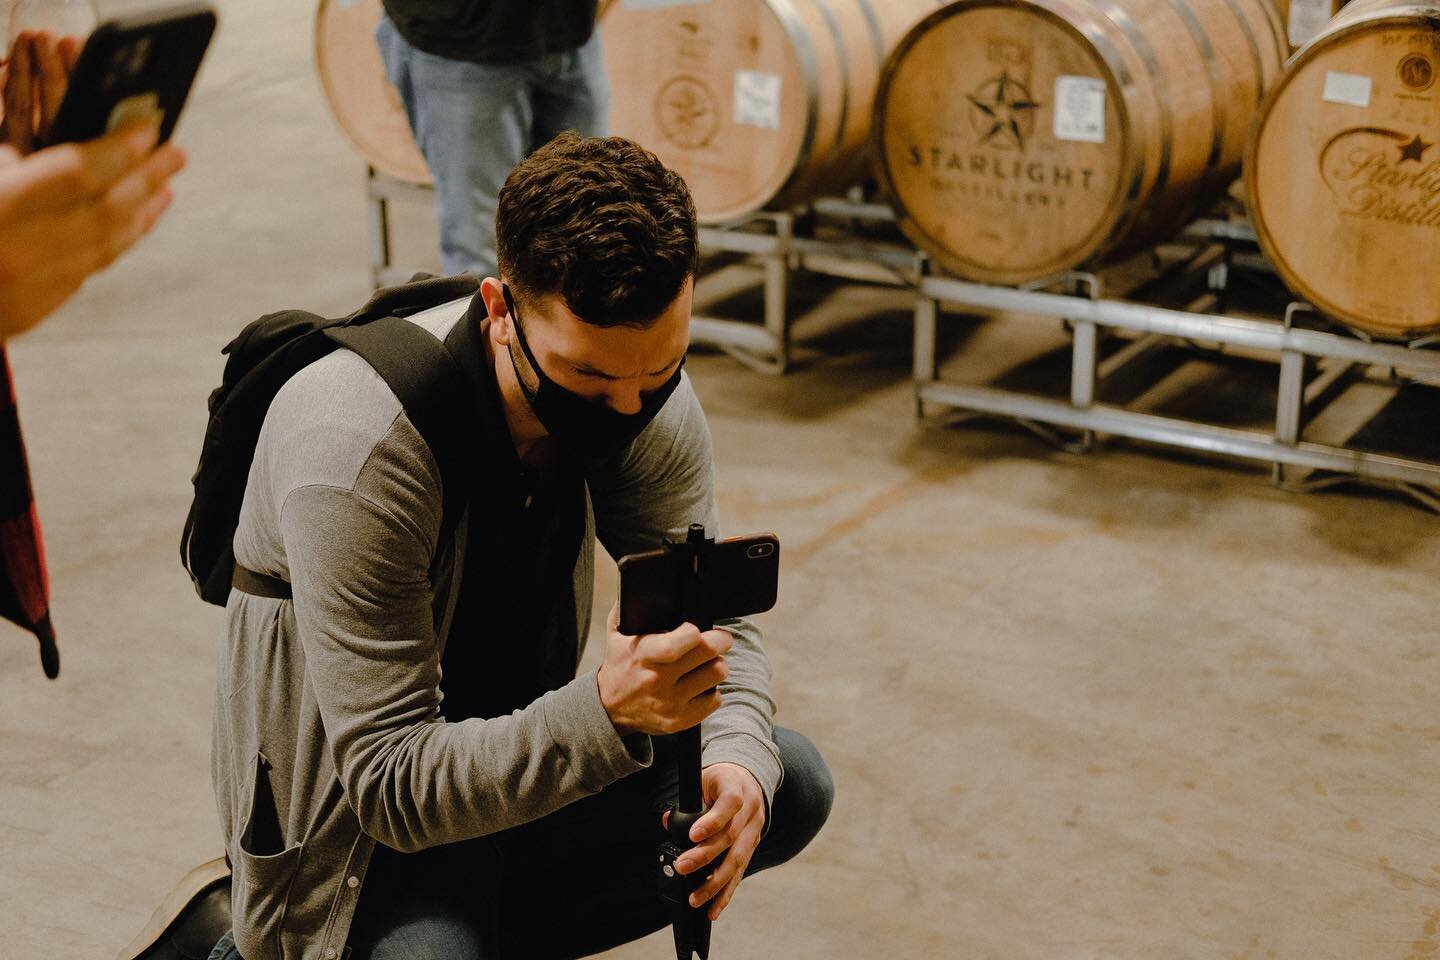 🔈 Brian and Drew hit the road (Drew a bit further) for our first barrel pick for Neat Nation. Today we recap our picking experience at @starlight_distillery in Borden, Indiana, and what we've brought back to soon be available for you. In the future 